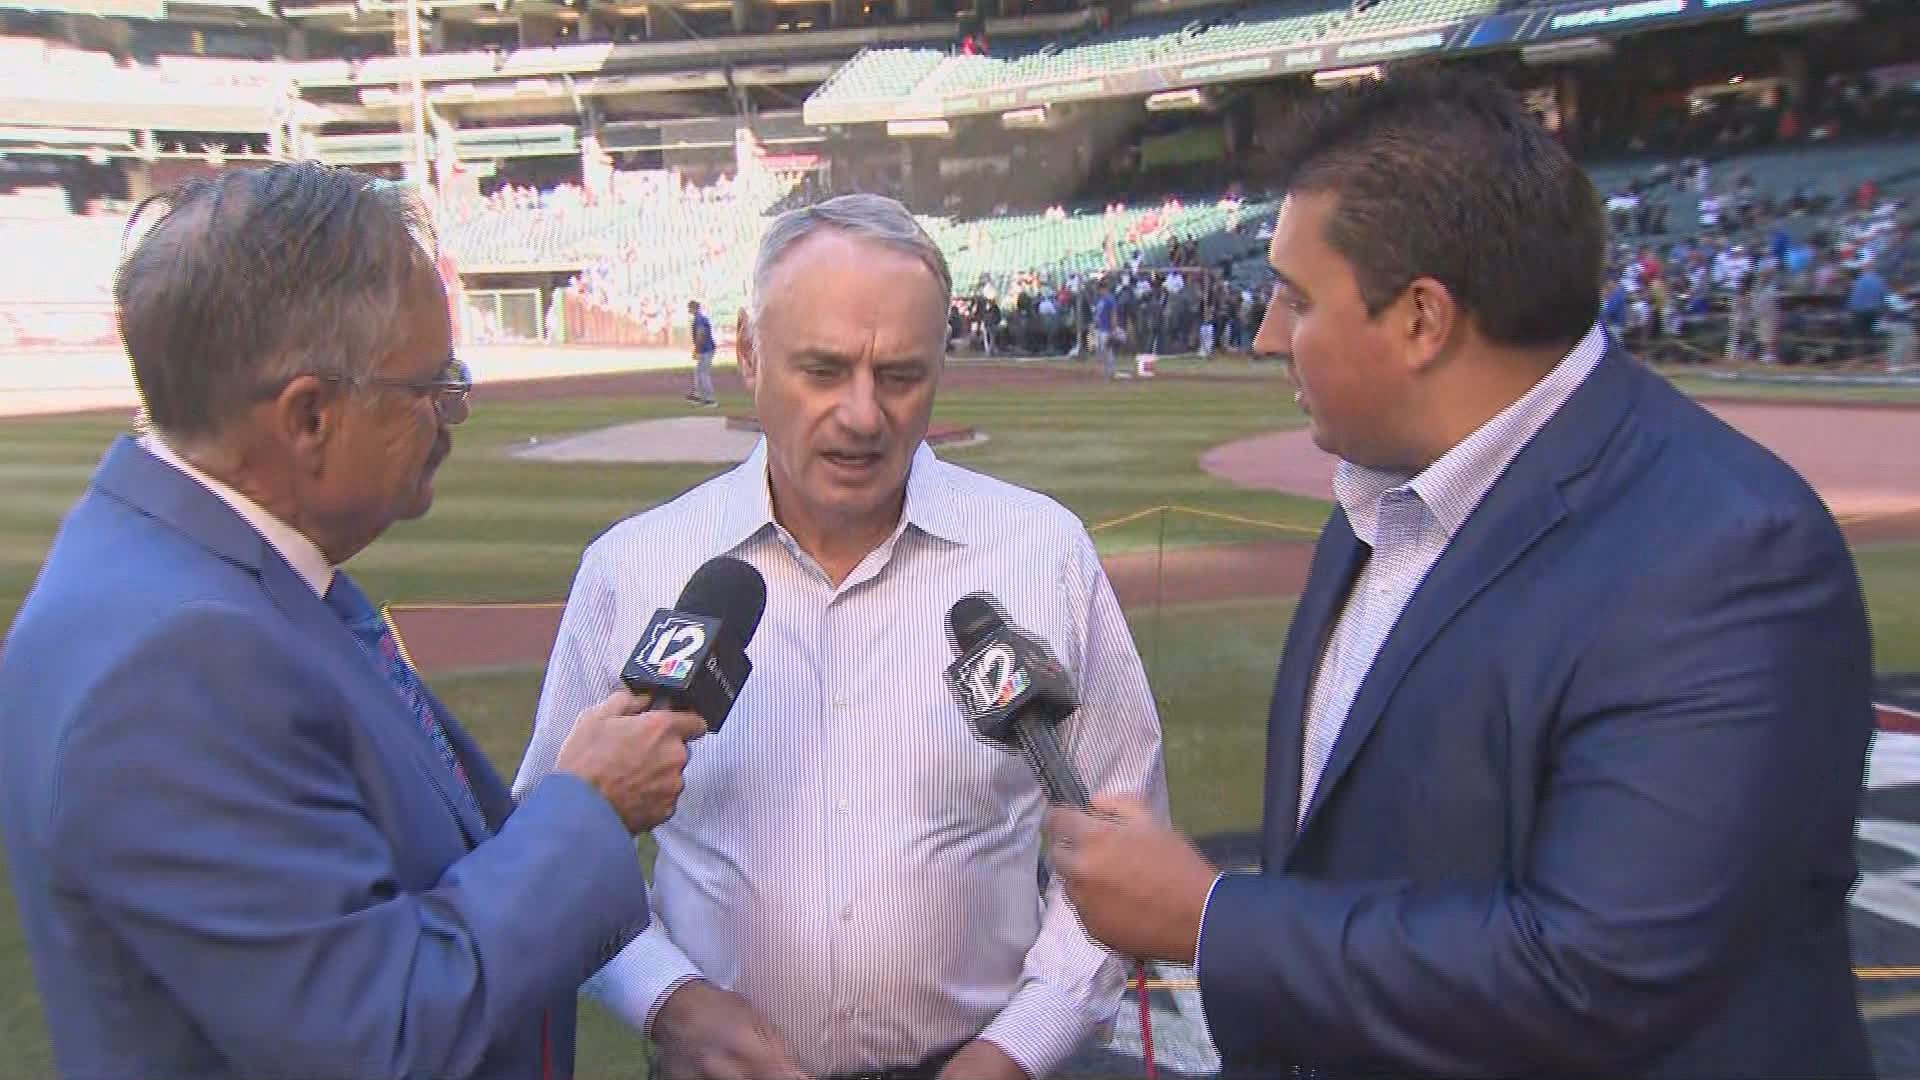 12News journalists Mark Curtis and Cameron Cox speak with MLB Commissioner Rob Manfred before Game 4 of the World Series